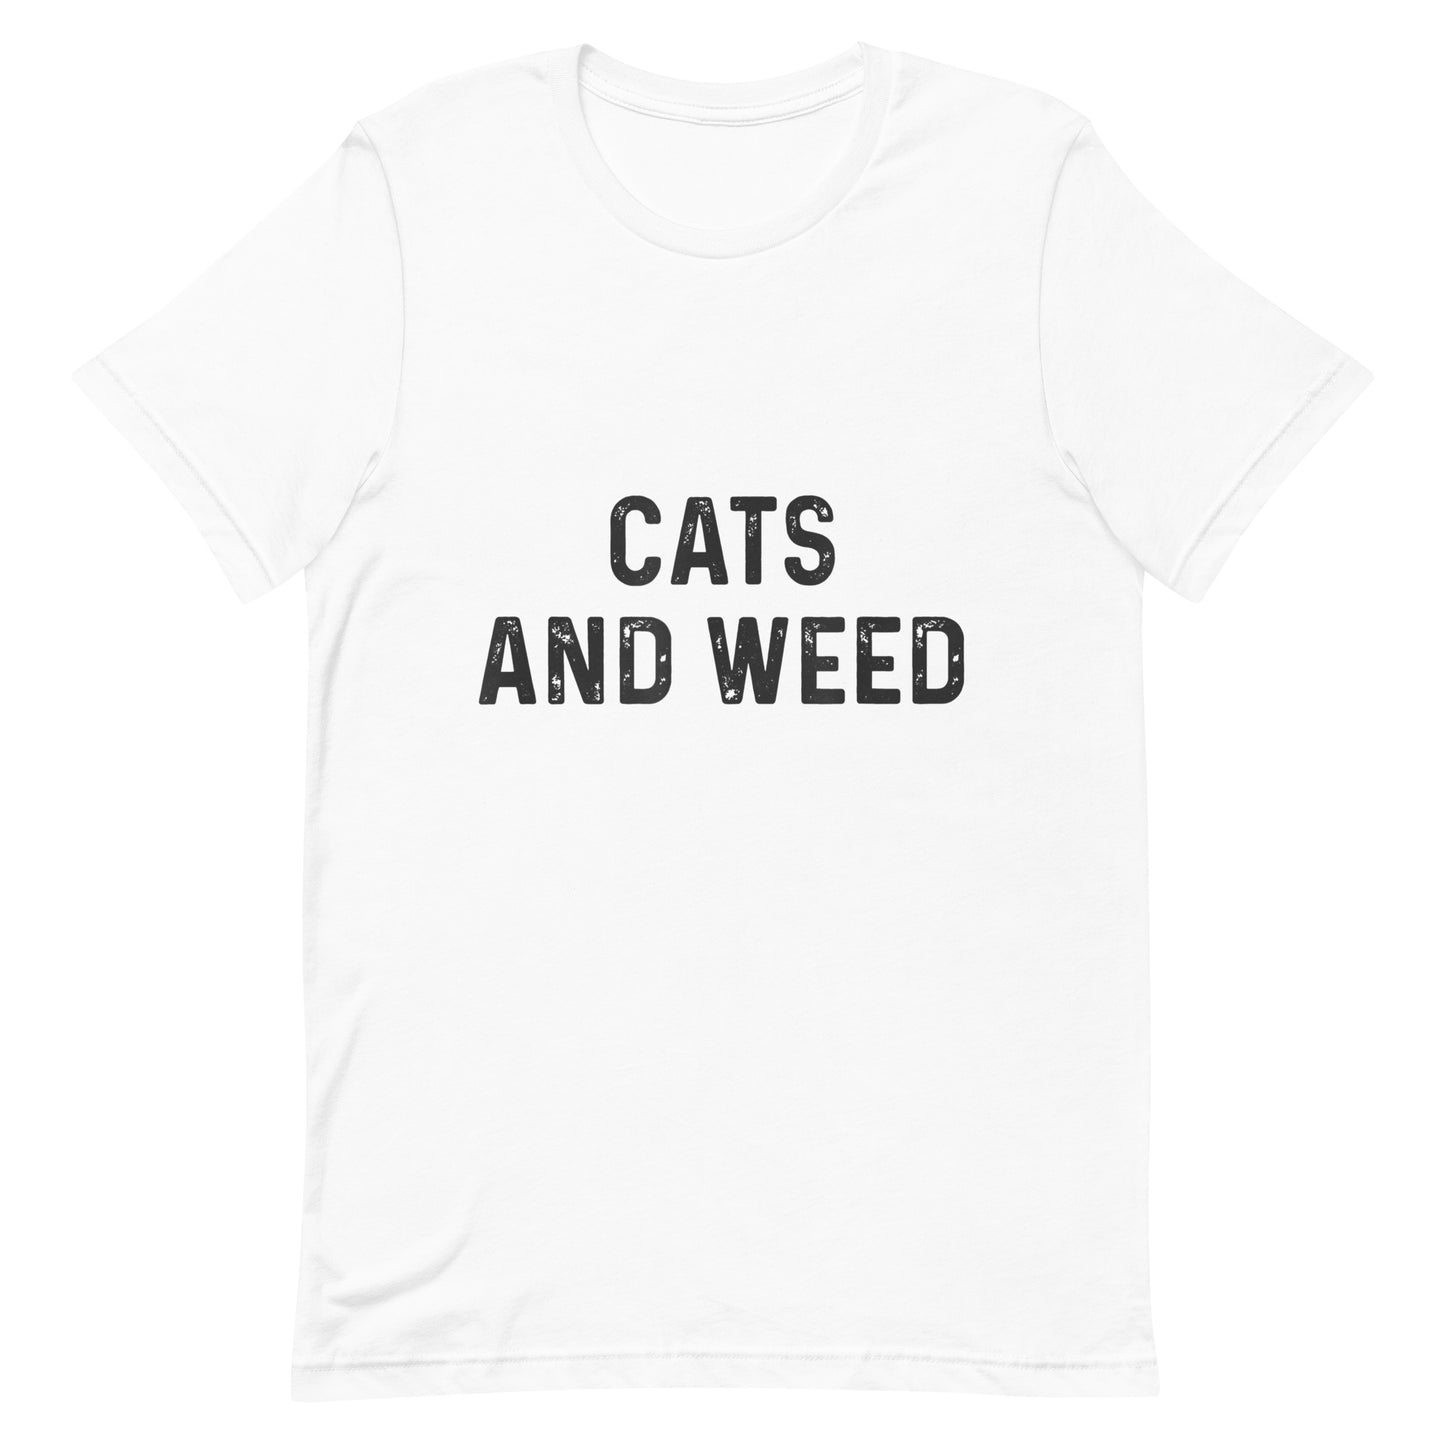 CATS and WEED Unisex T-shirt